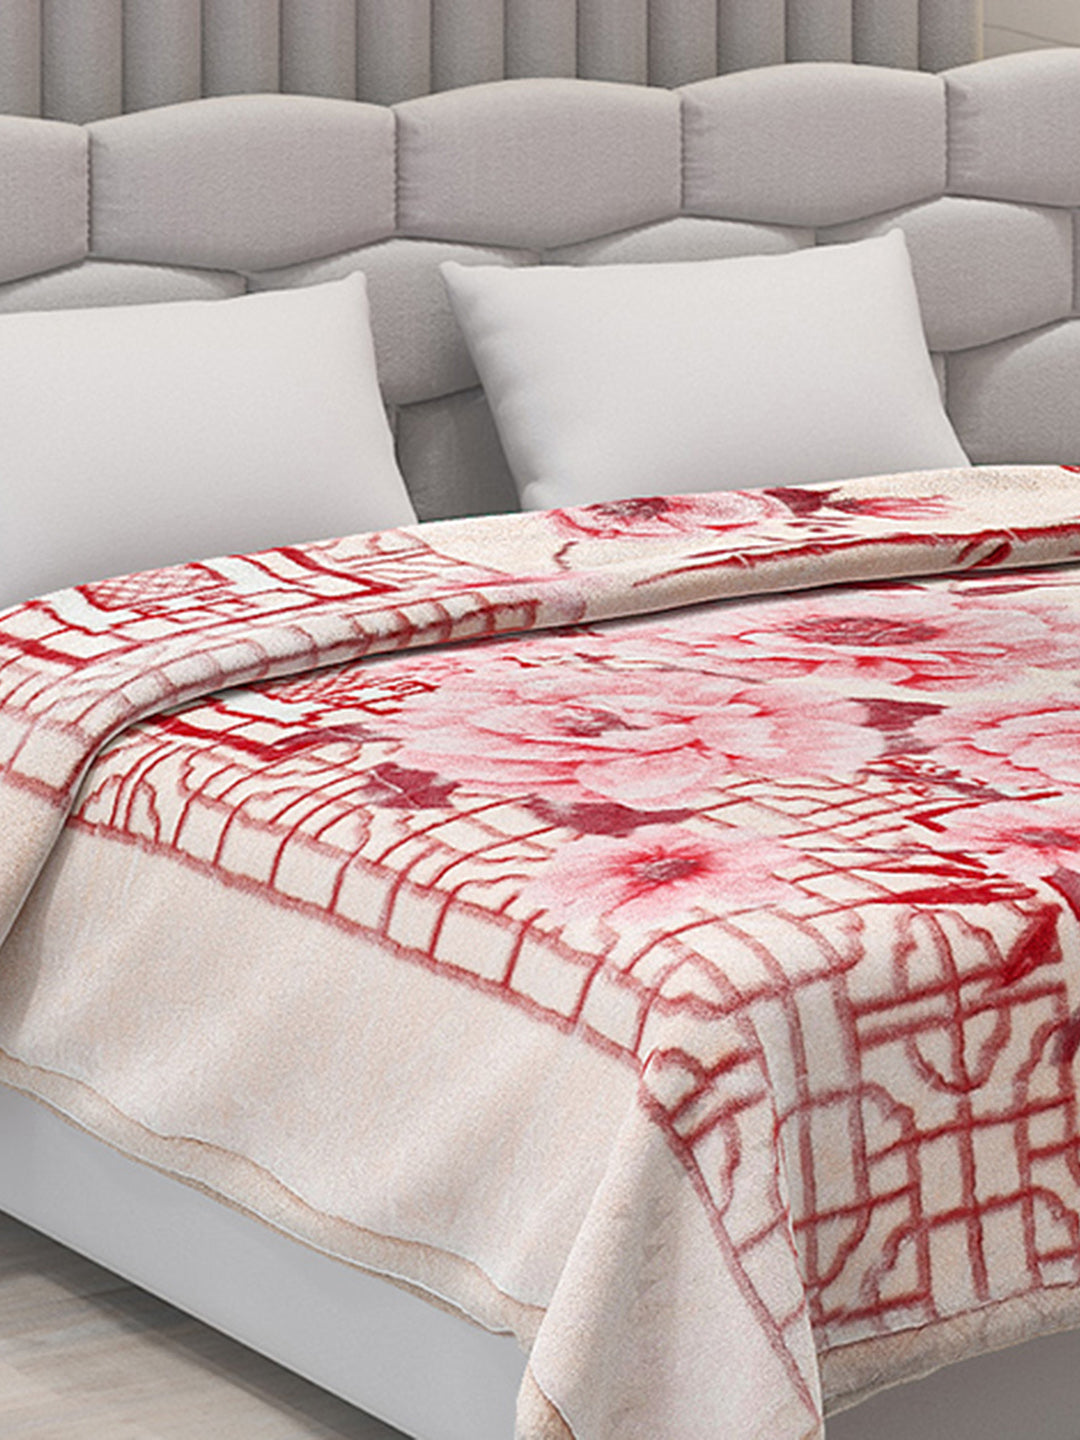 Printed Double Bed Blanket for Heavy Winter -3 Ply